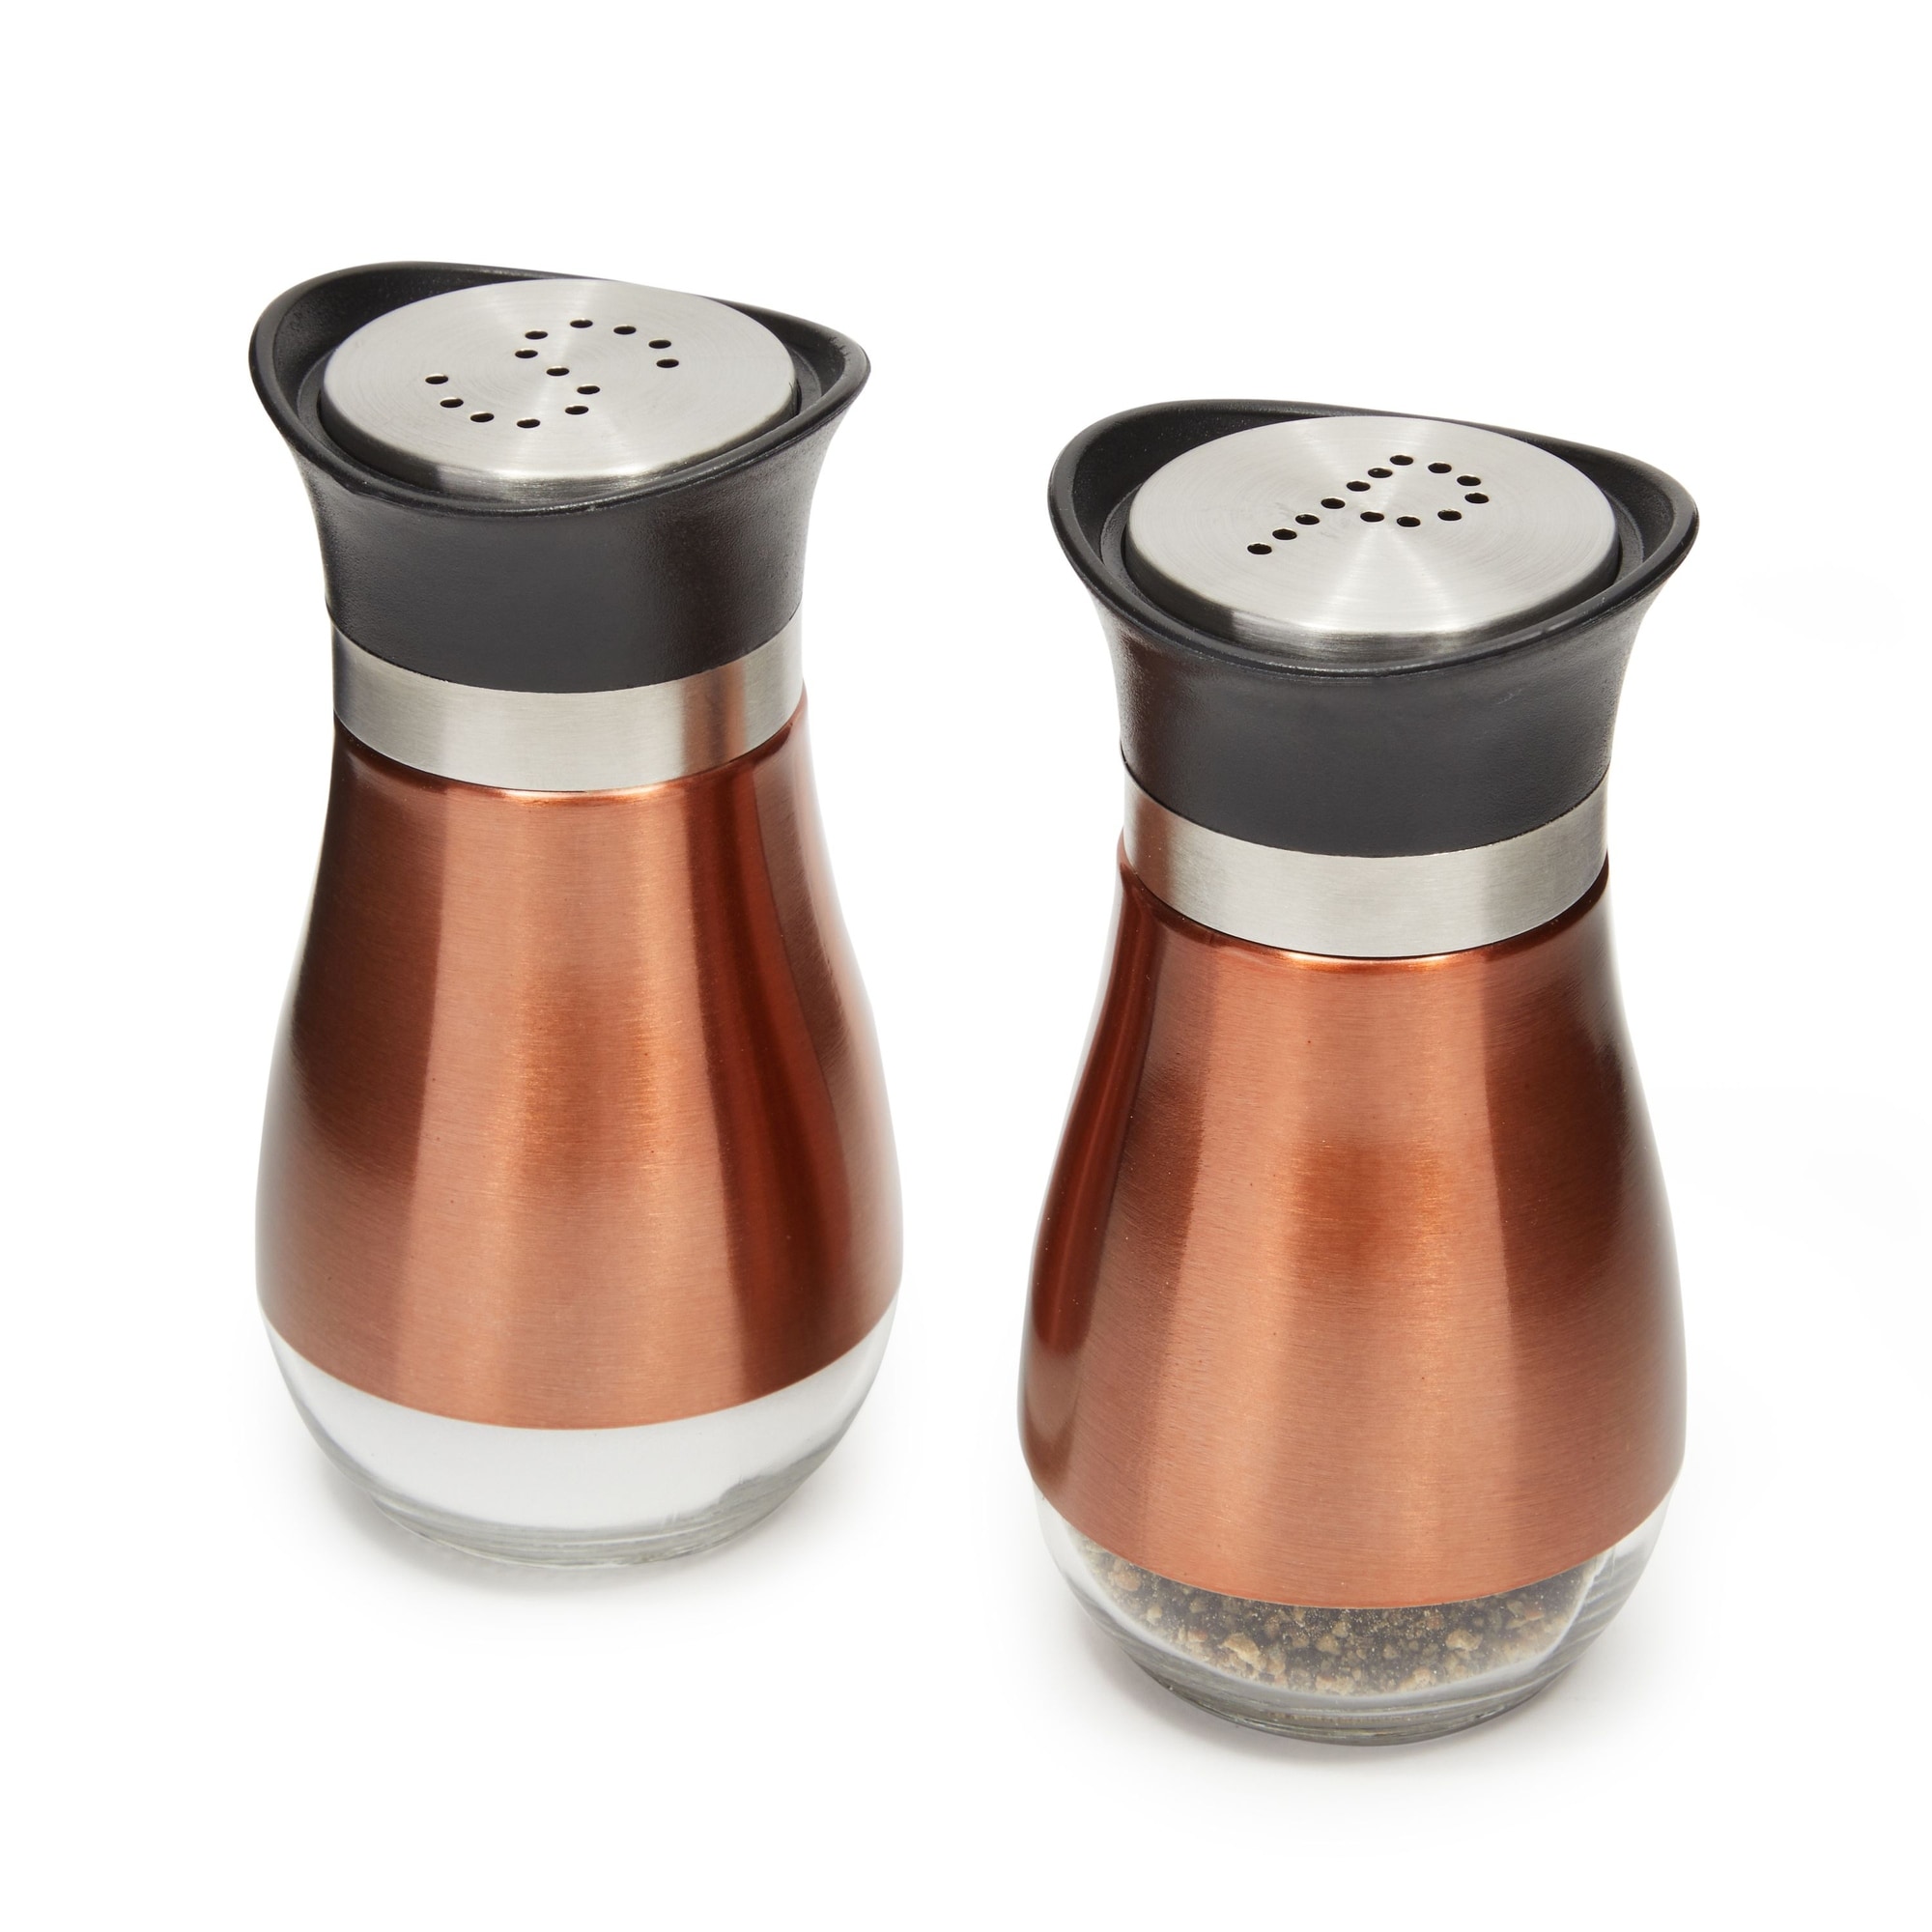 Salt and Pepper Grinders Refillable Stainless Steel Pepper Shakers